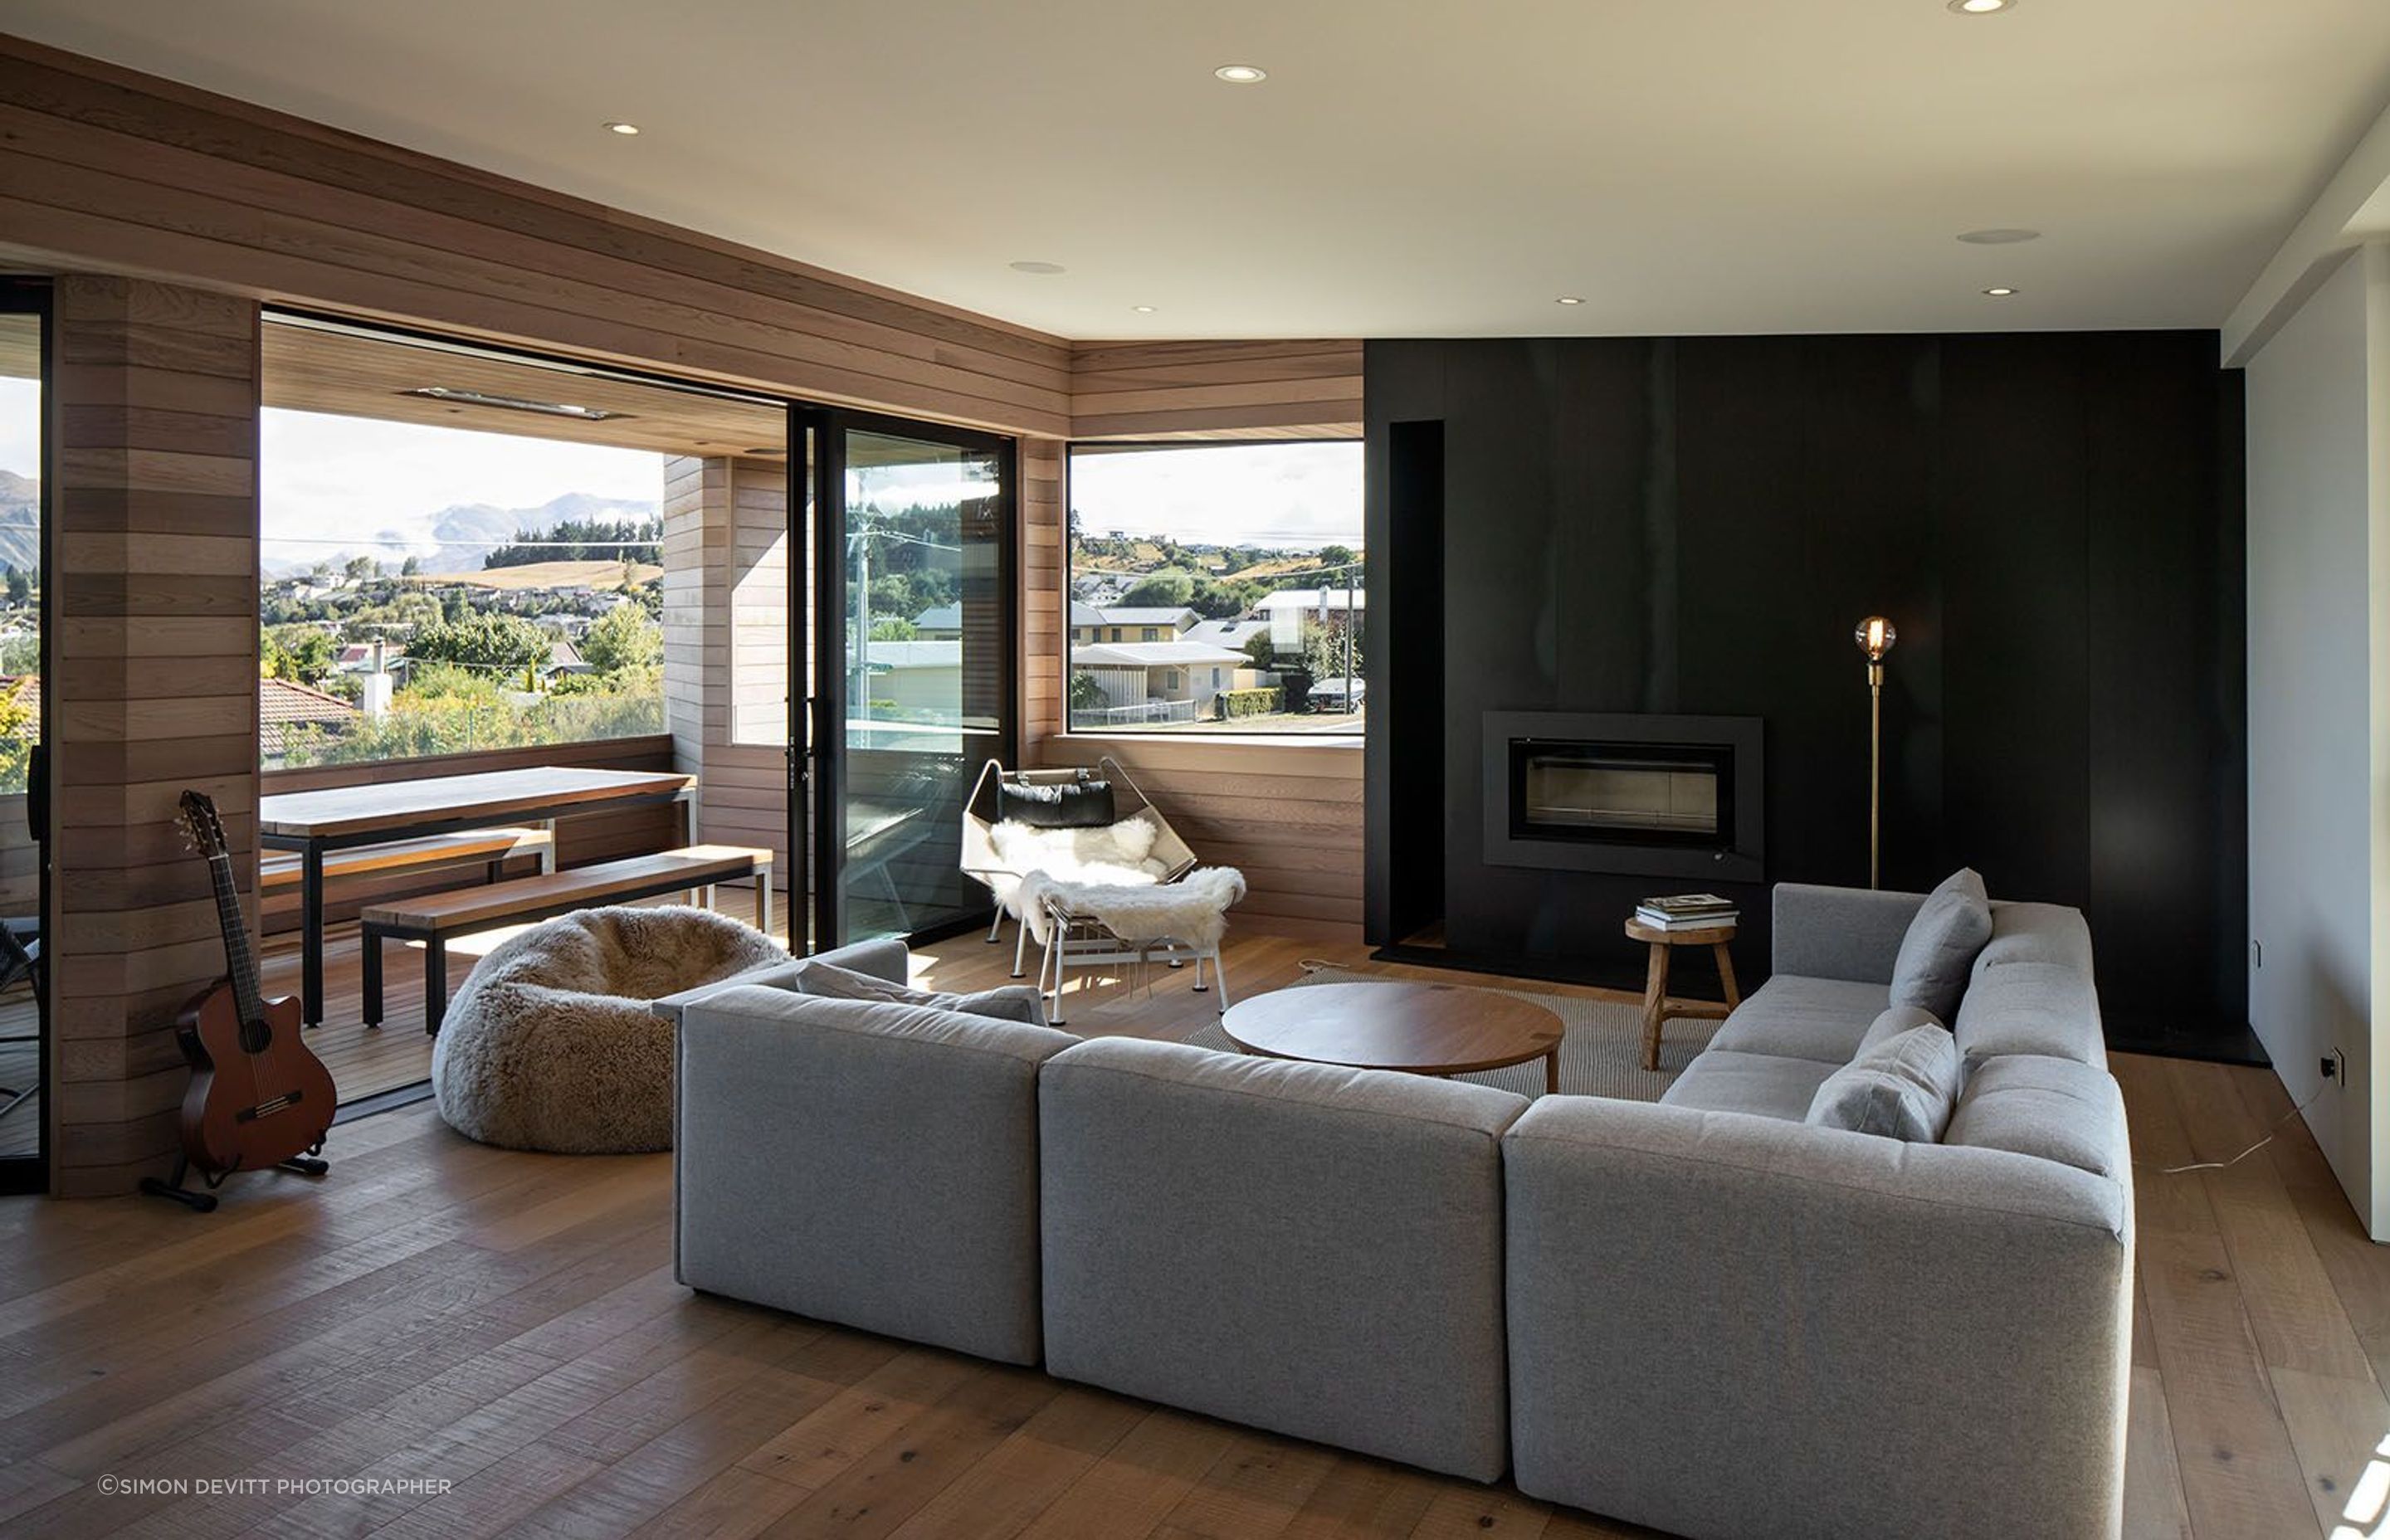 The open-plan living space opens via the balcony to the view. A steel feature wall incorporates a fireplace. The timber-panelled floor and  front wall flows through to the balcony.